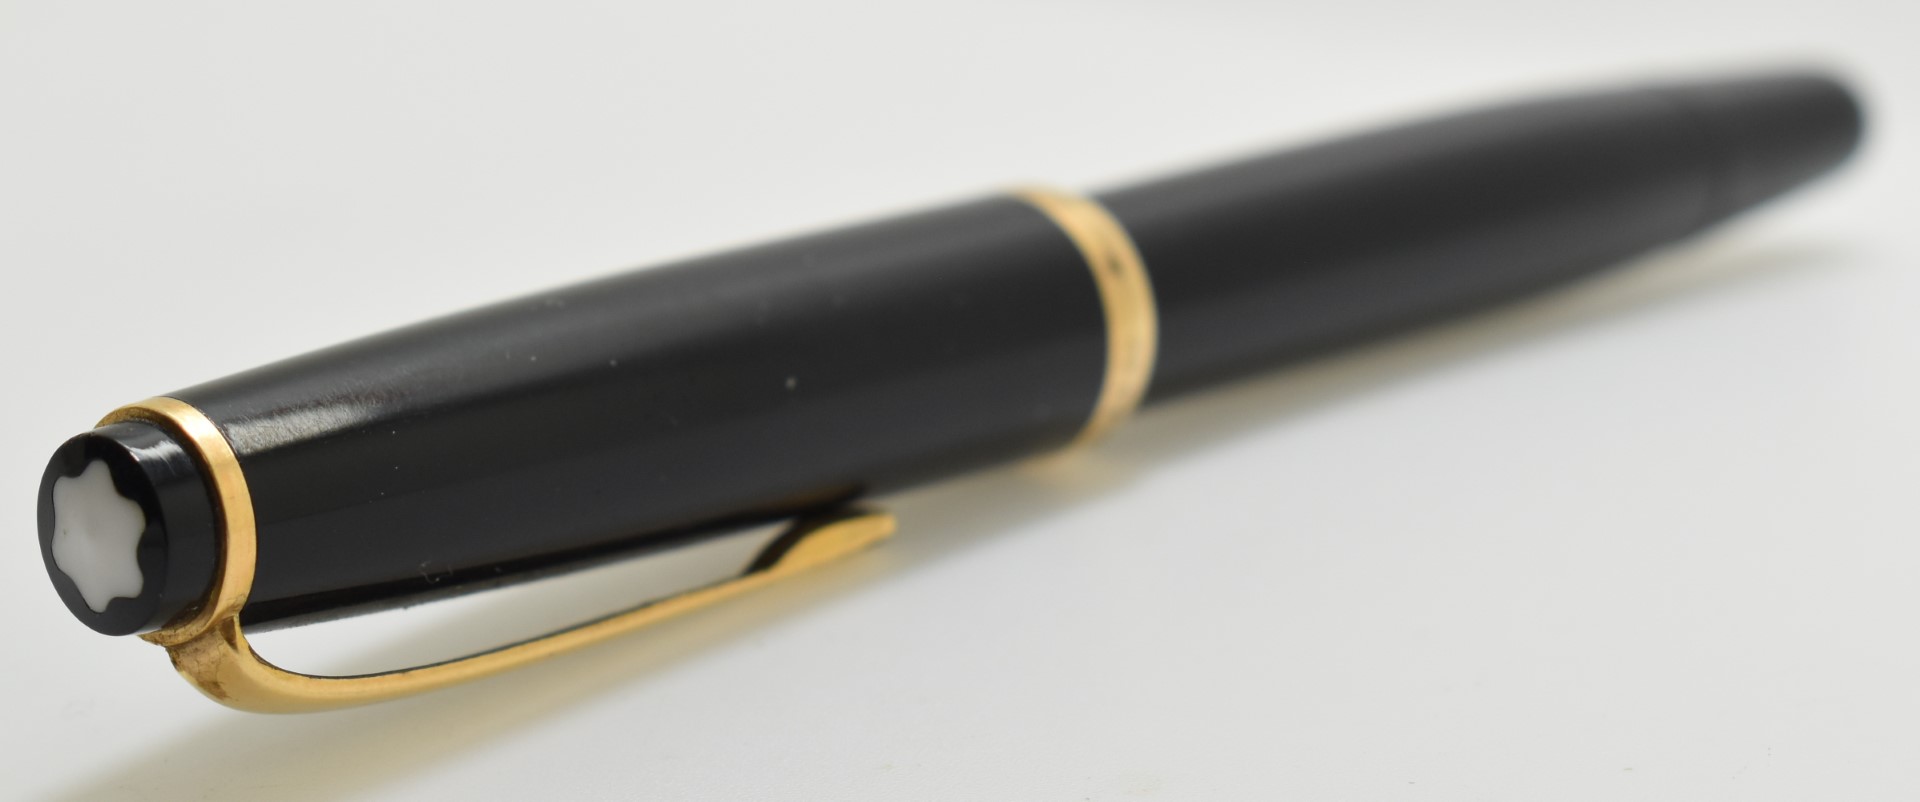 Montblanc 342 fountain pen with number 2 nib, black resin body and gold plated fittings, in original - Image 6 of 10